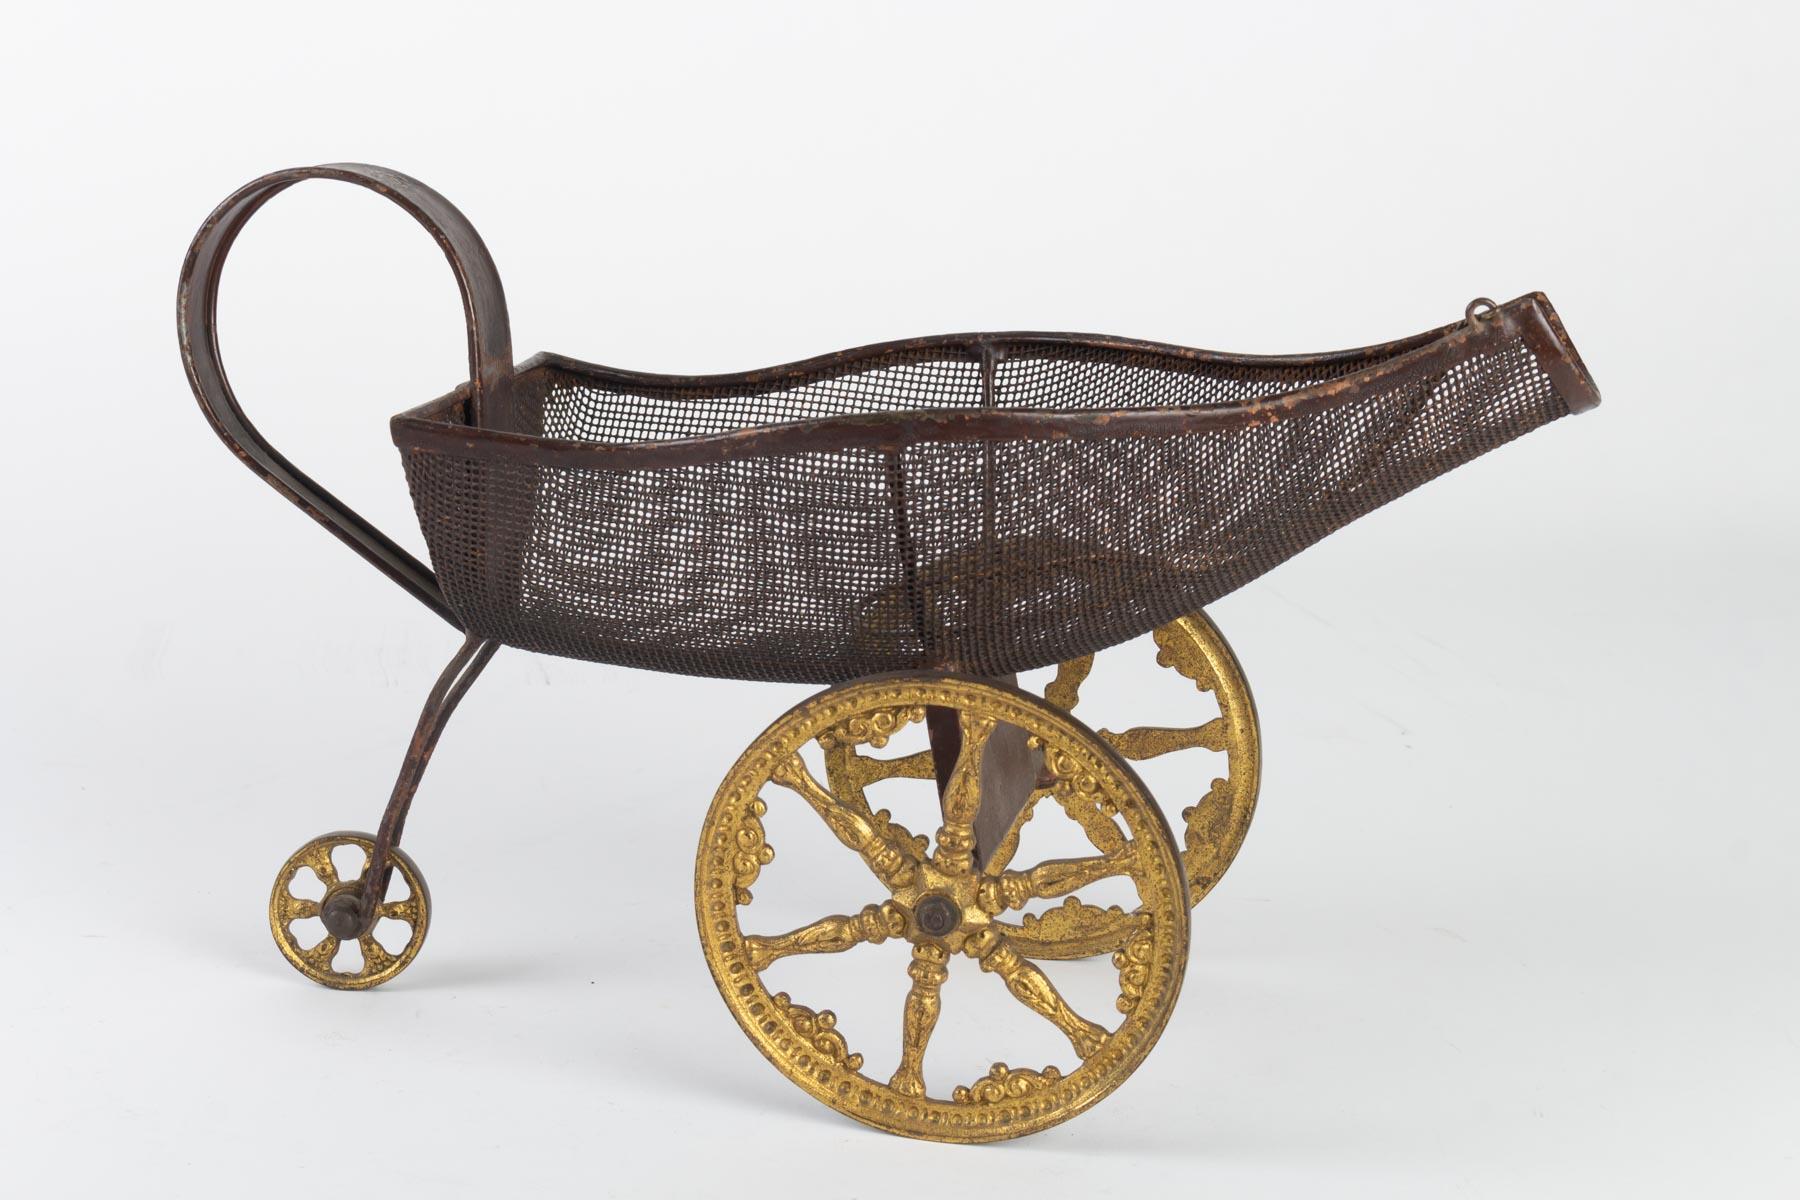 Rare bottle trolley in sheet metal and gilded metal, France, circa 1850.

Measures: H 20 cm, W 33 cm, D 15 cm.